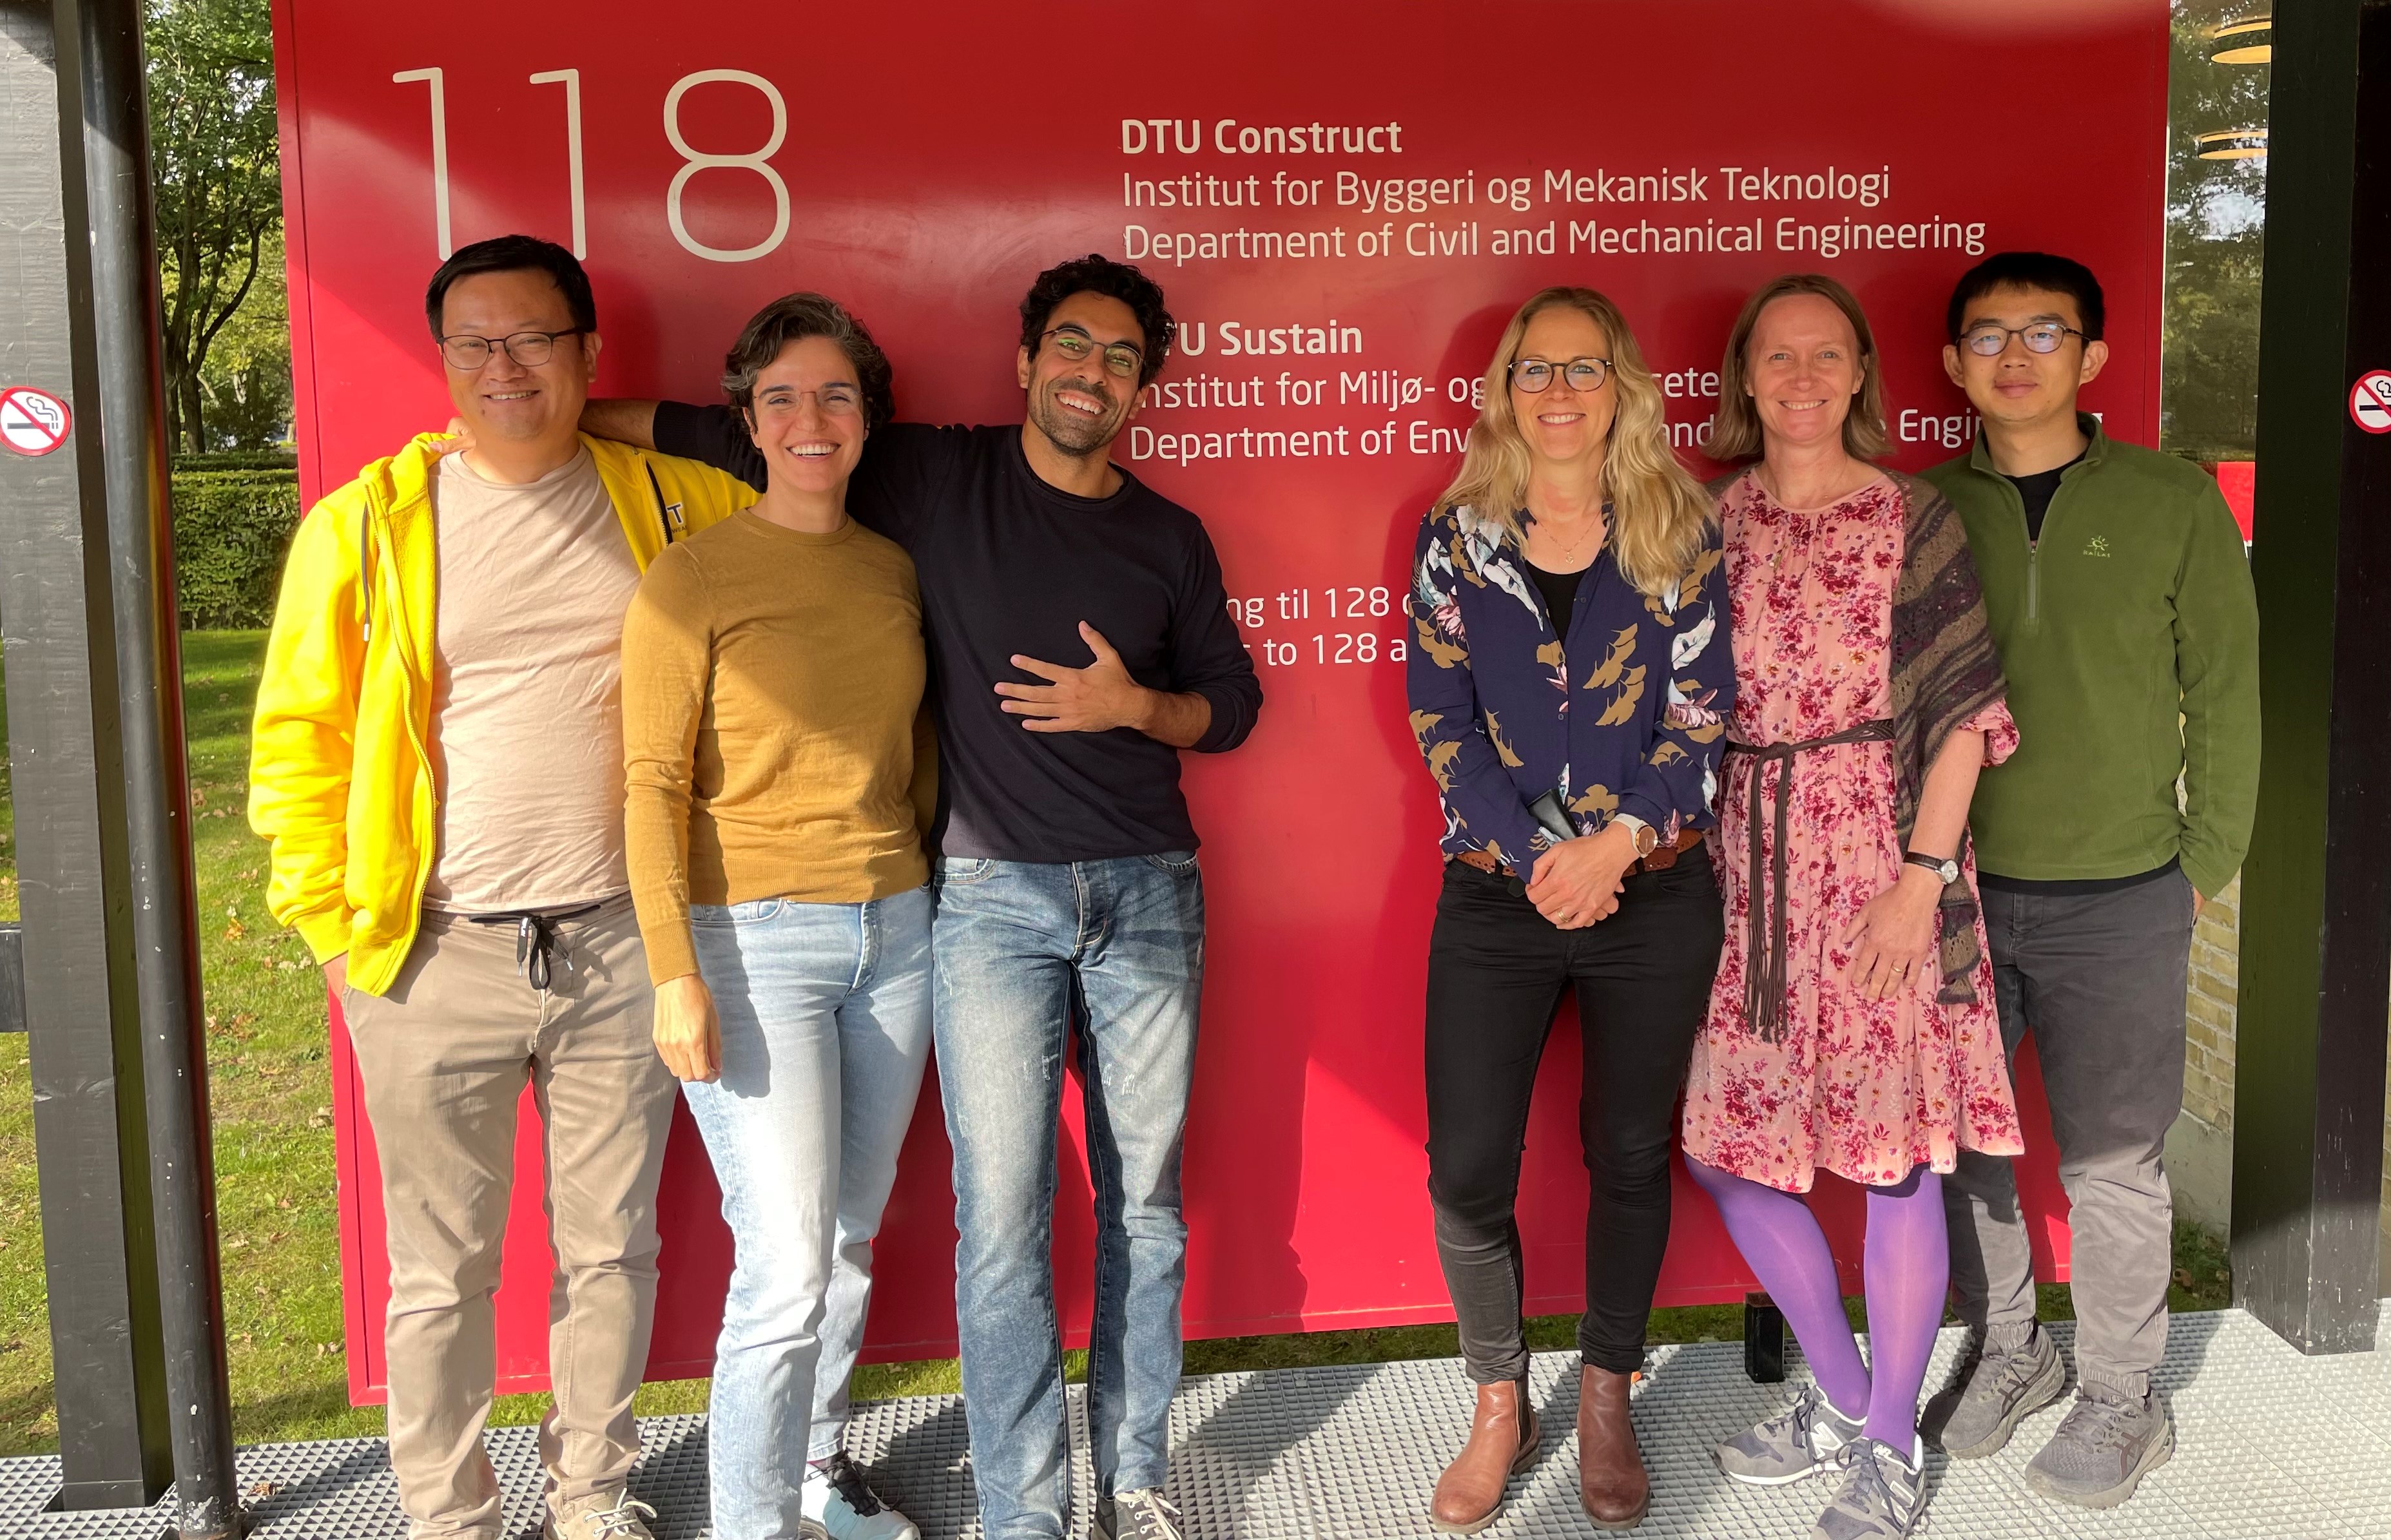 Group photo of project scientists beside a DTU sign with text on it